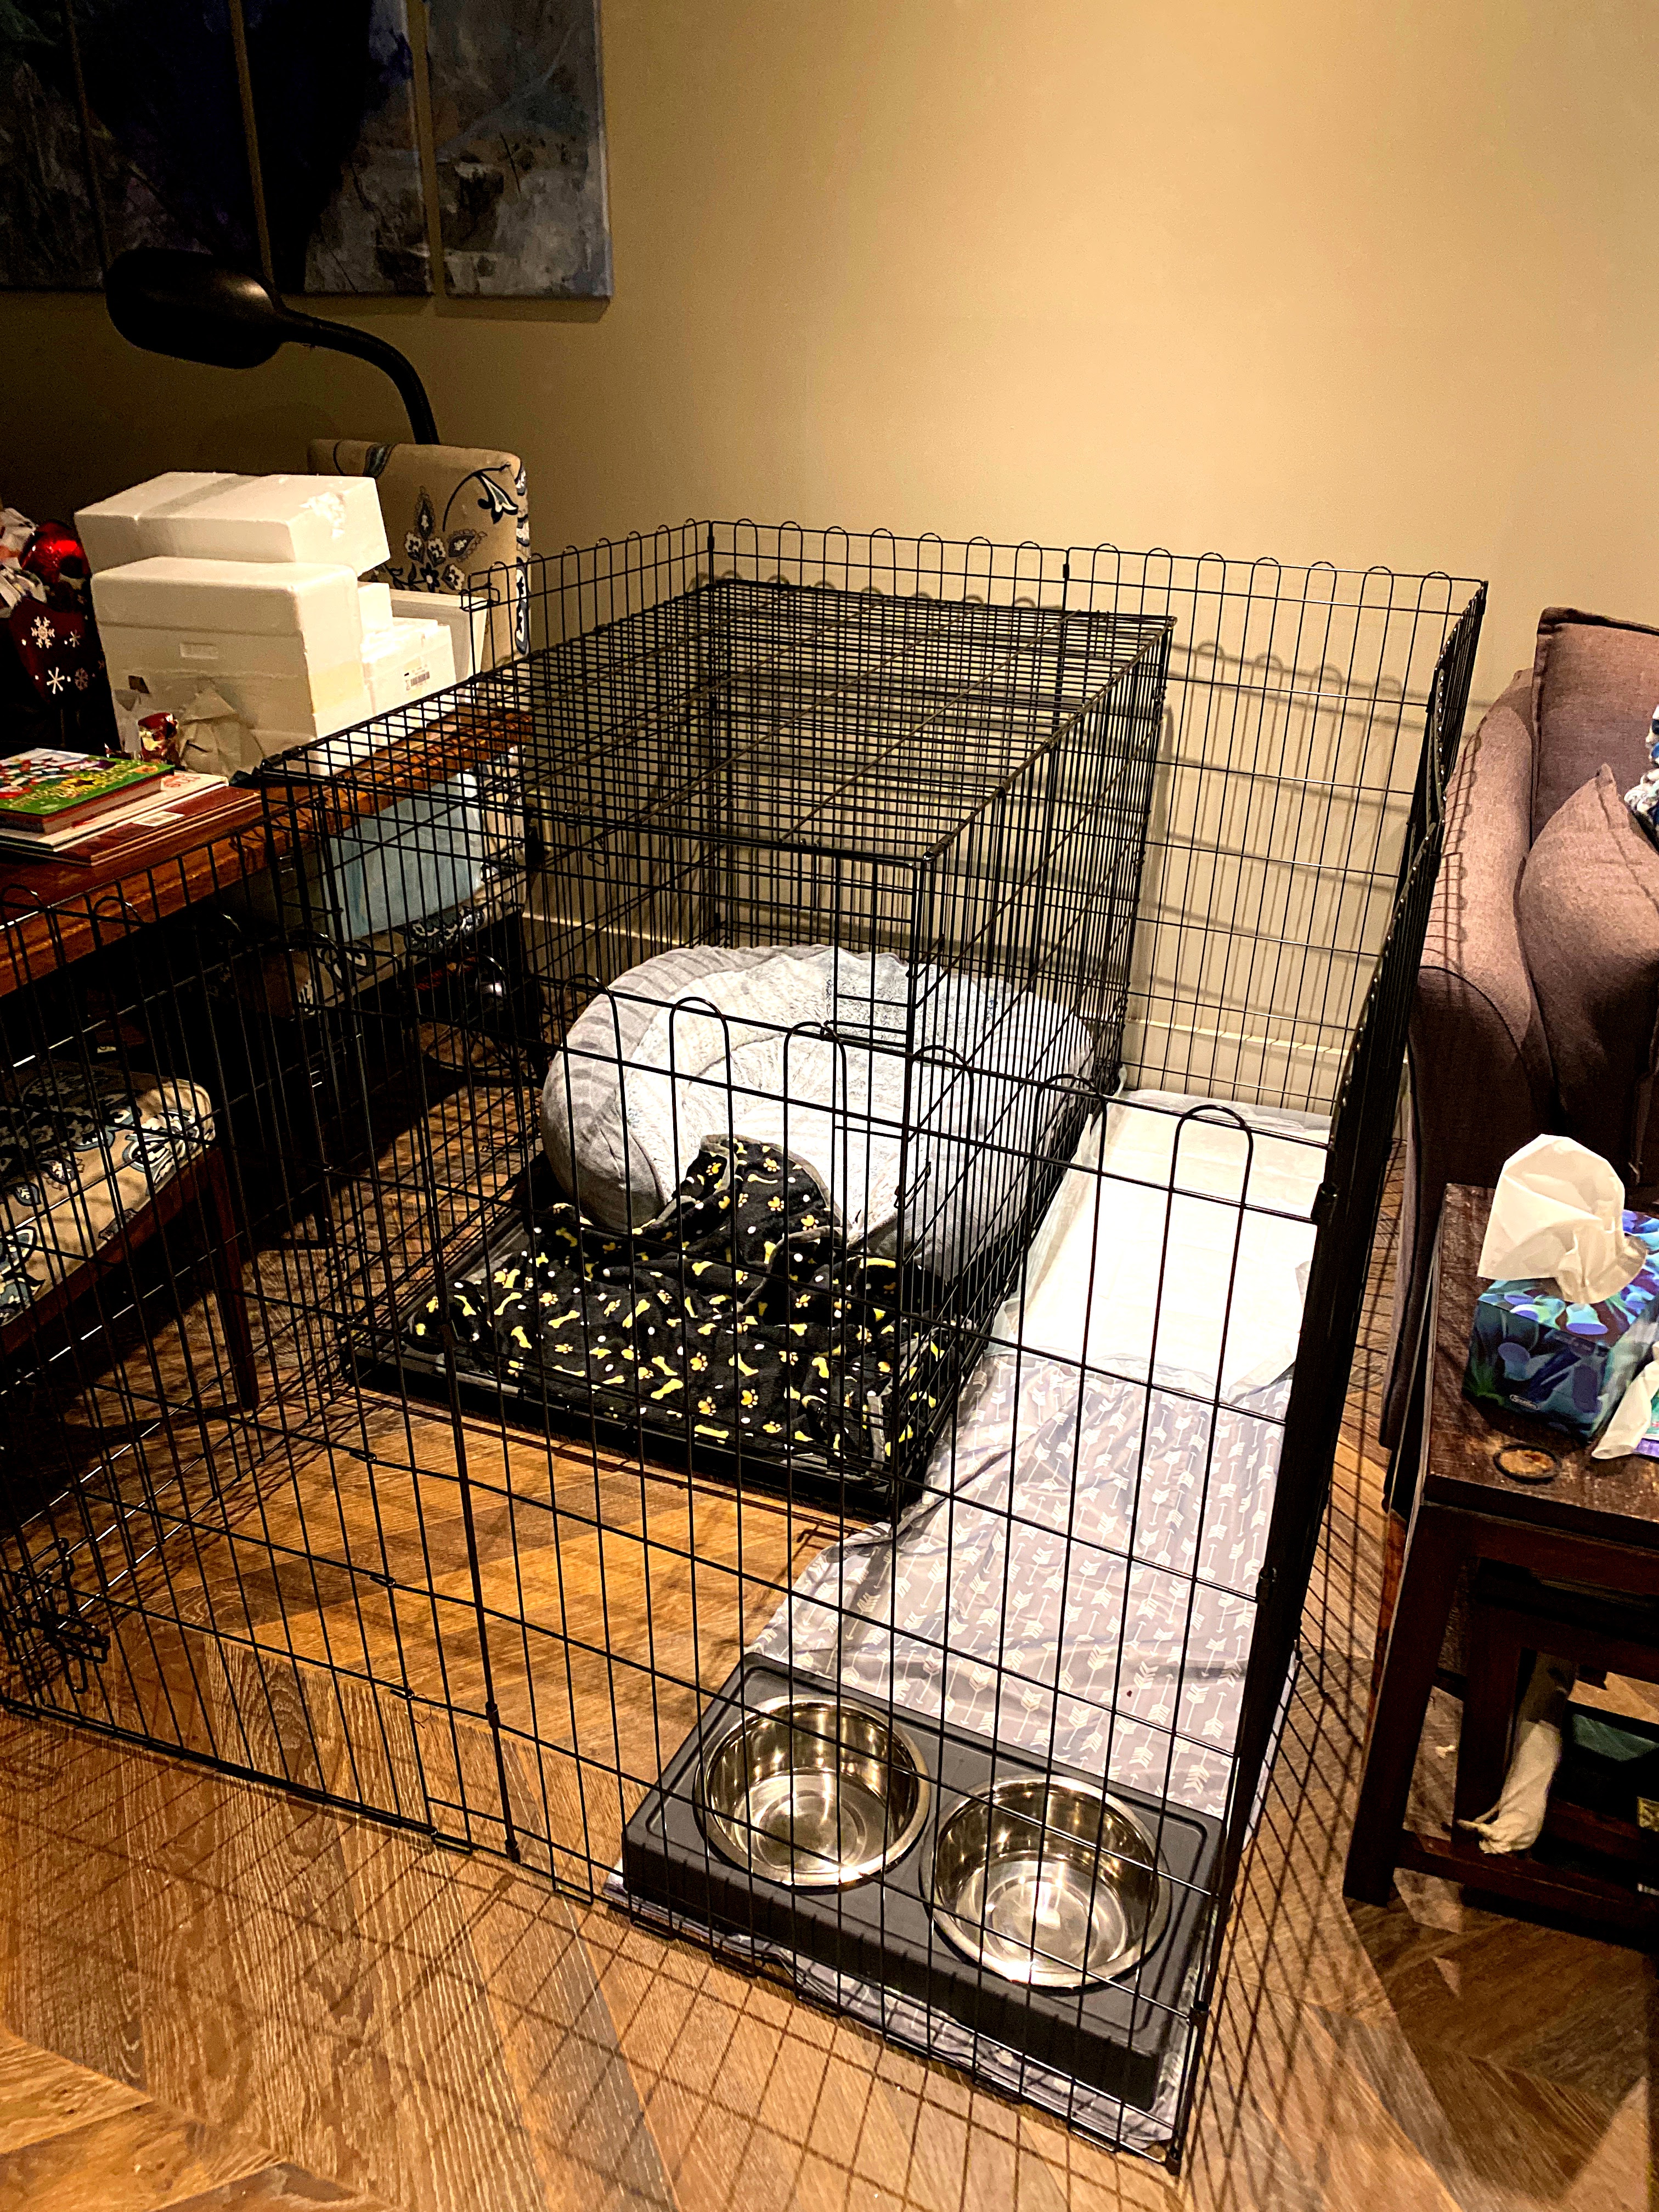 Crate and play area for a puppy